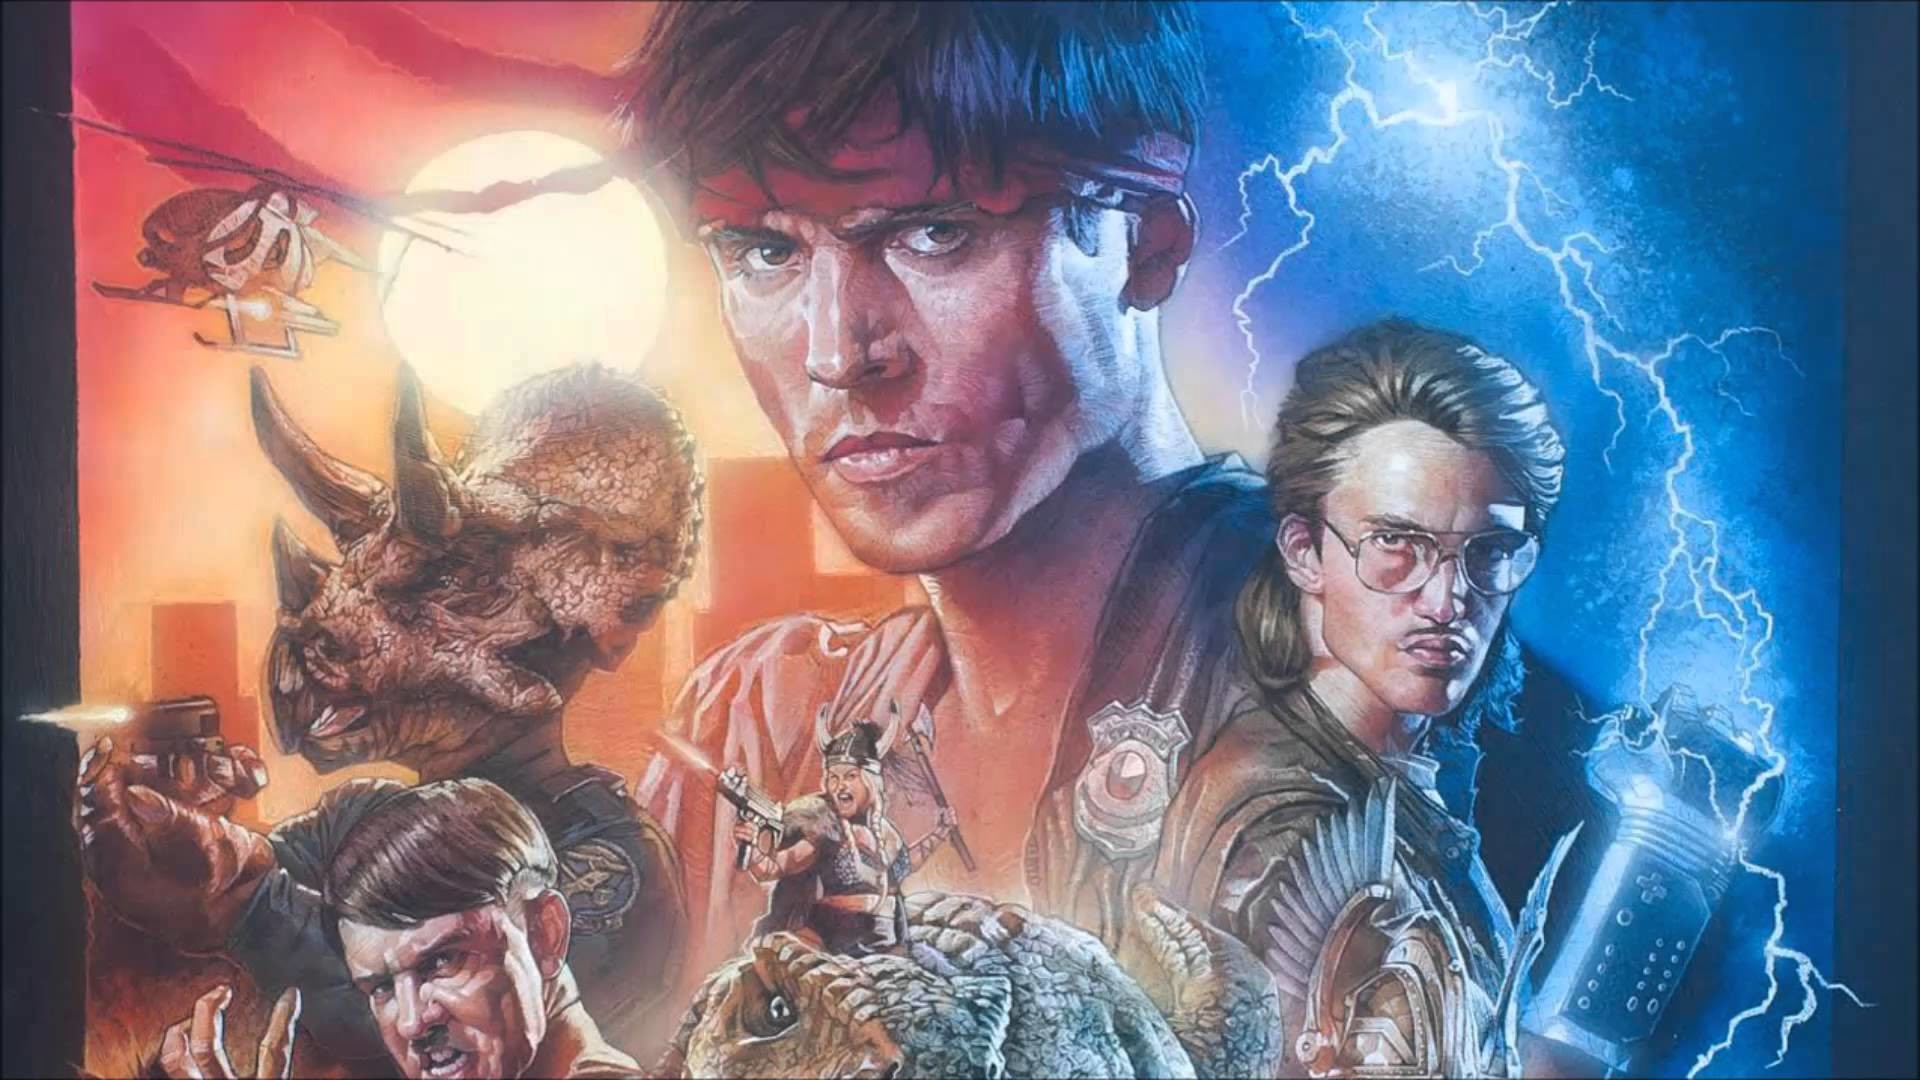 1920x1080 [Kung Fury OST] 07. Mitch Murder - Enter The Fury - YouTube